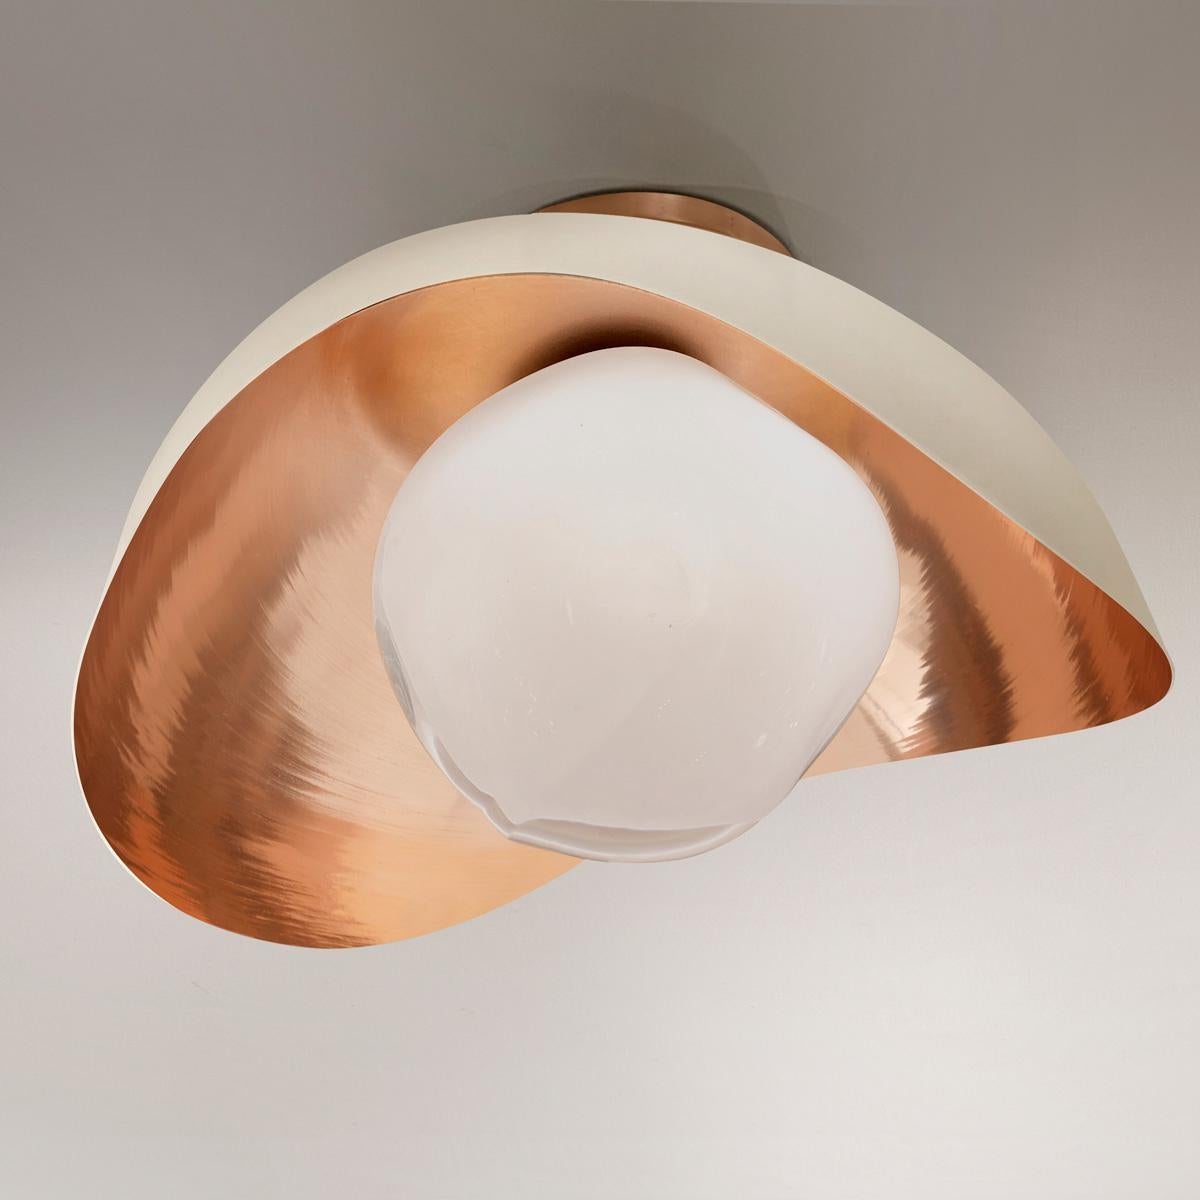 The Perla flushmount features an organic brass shell nestling our Sfera glass handblown in Tuscany. The first images show the fixture with a polished copper interior and sand white exterior finish-subsequent pictures show it in a selection of